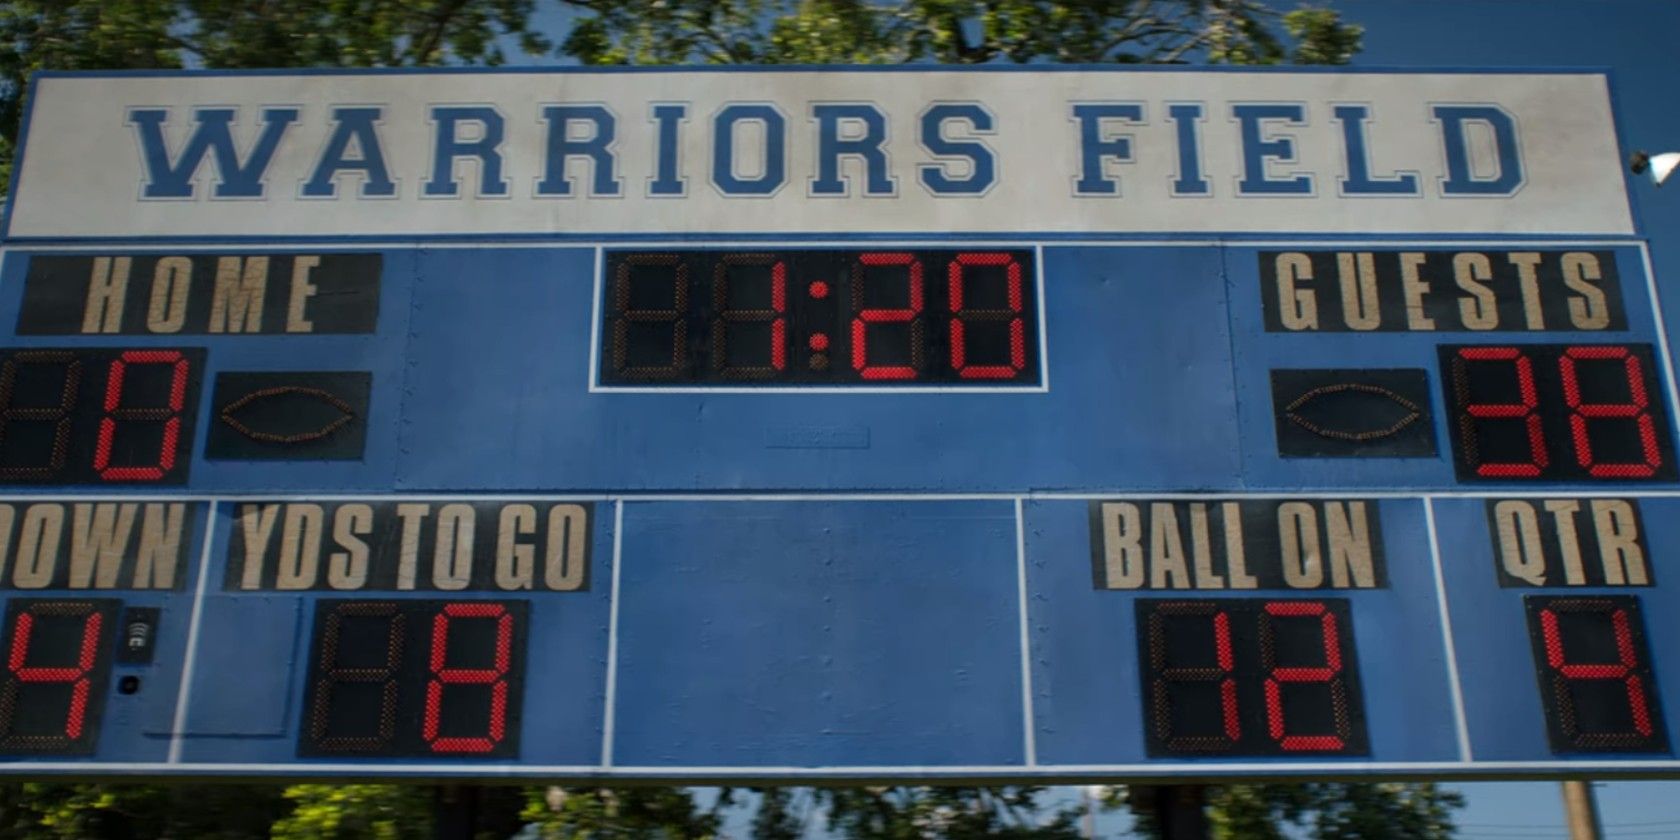 First scoreboard in Home Team showing the Warriors losing 0 to 38.